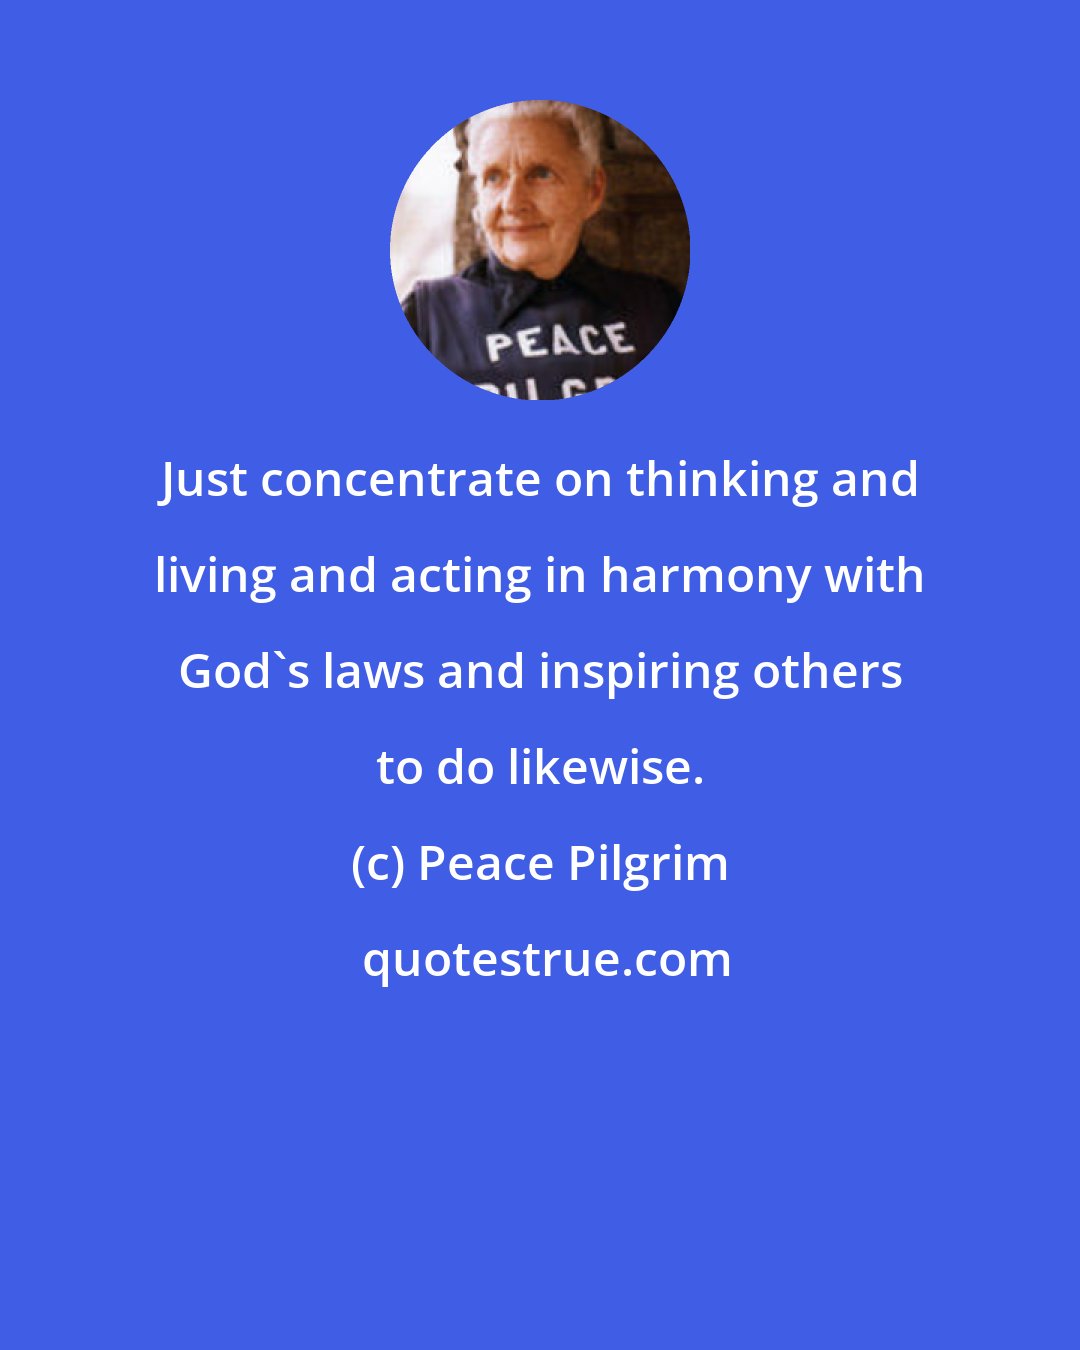 Peace Pilgrim: Just concentrate on thinking and living and acting in harmony with God's laws and inspiring others to do likewise.